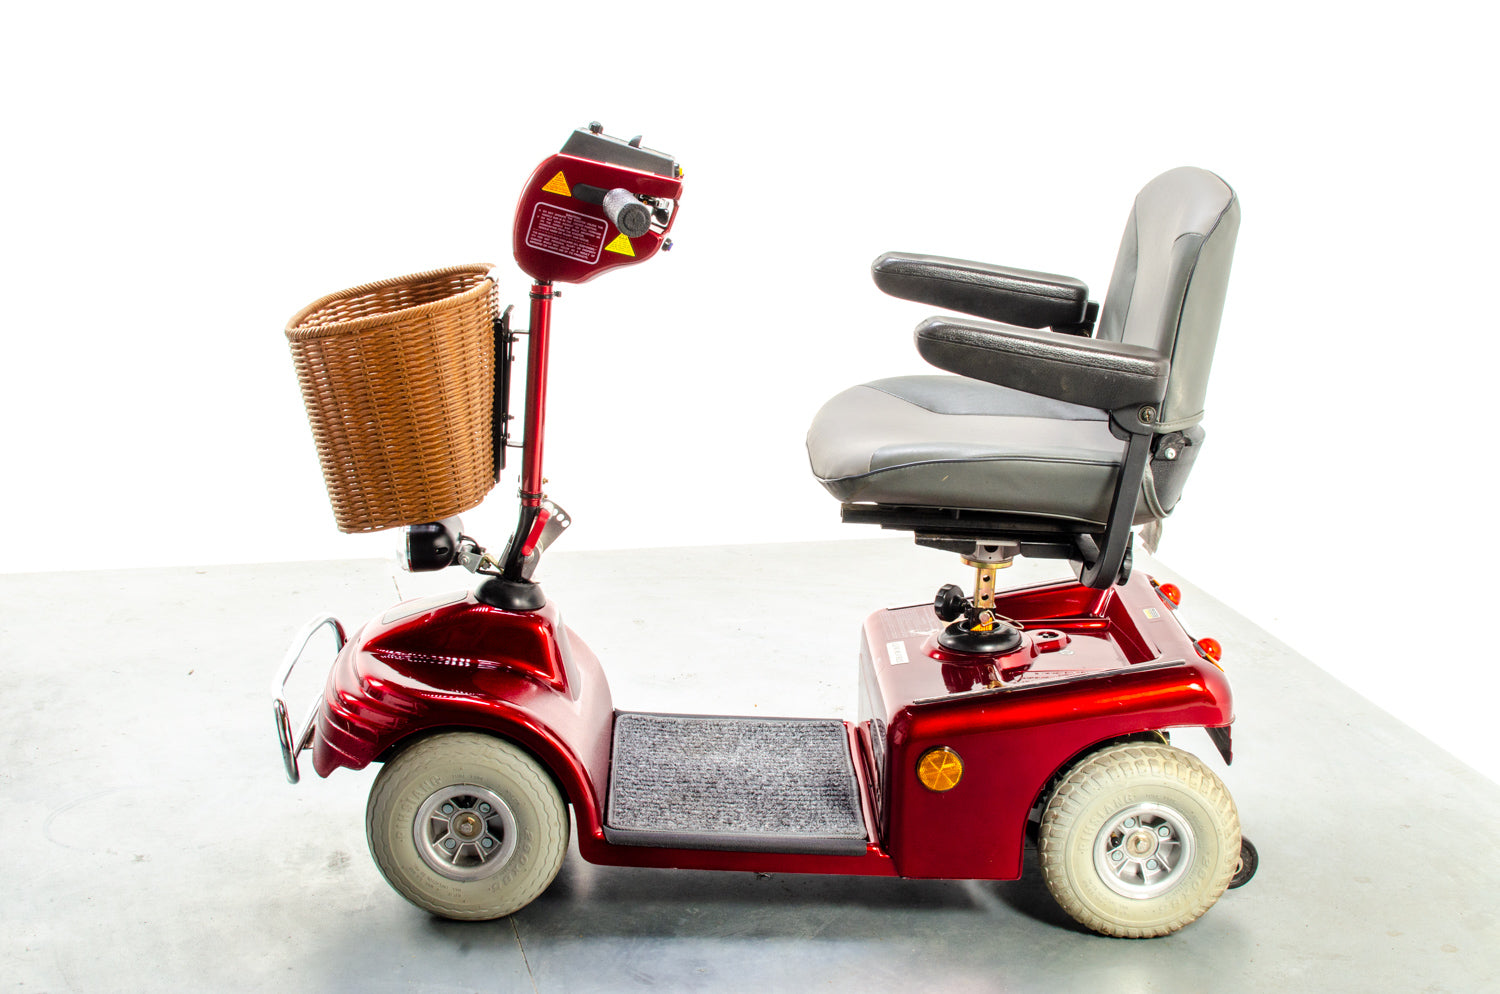 Roma Shoprider Sovereign Comfort Mobility Scooter Used Pavement Pneumatic